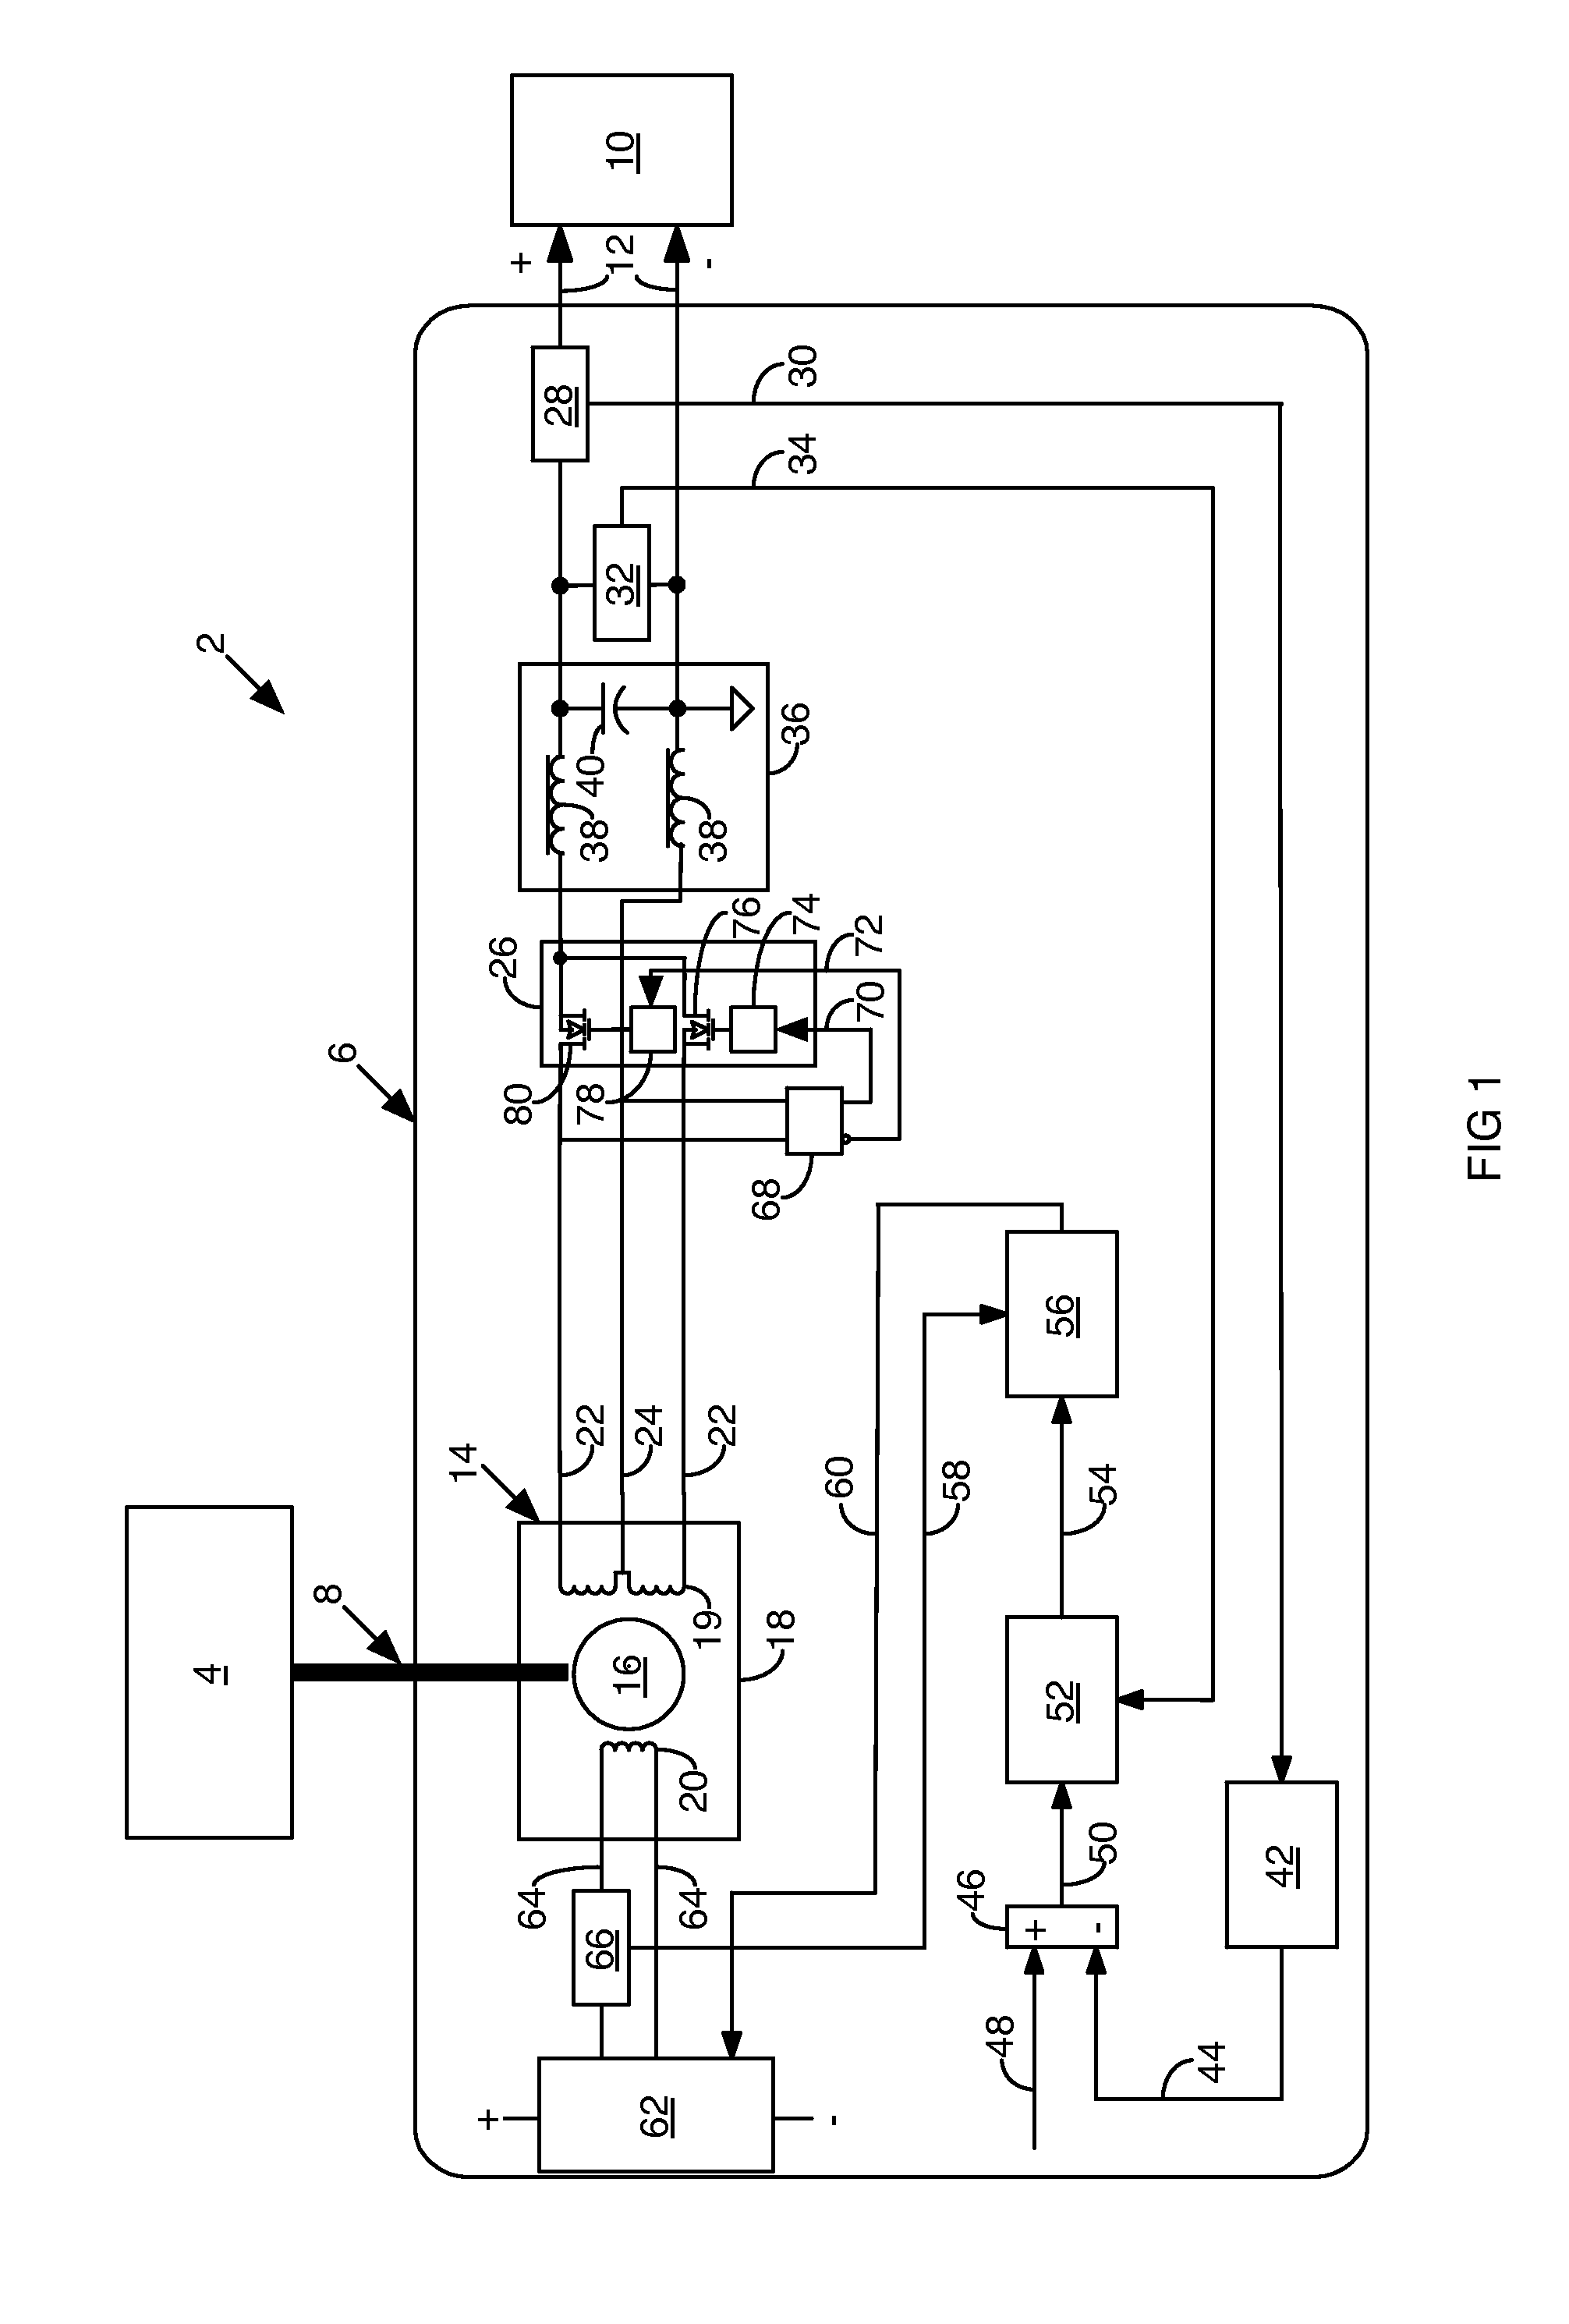 Power generating system with flux regulated generator